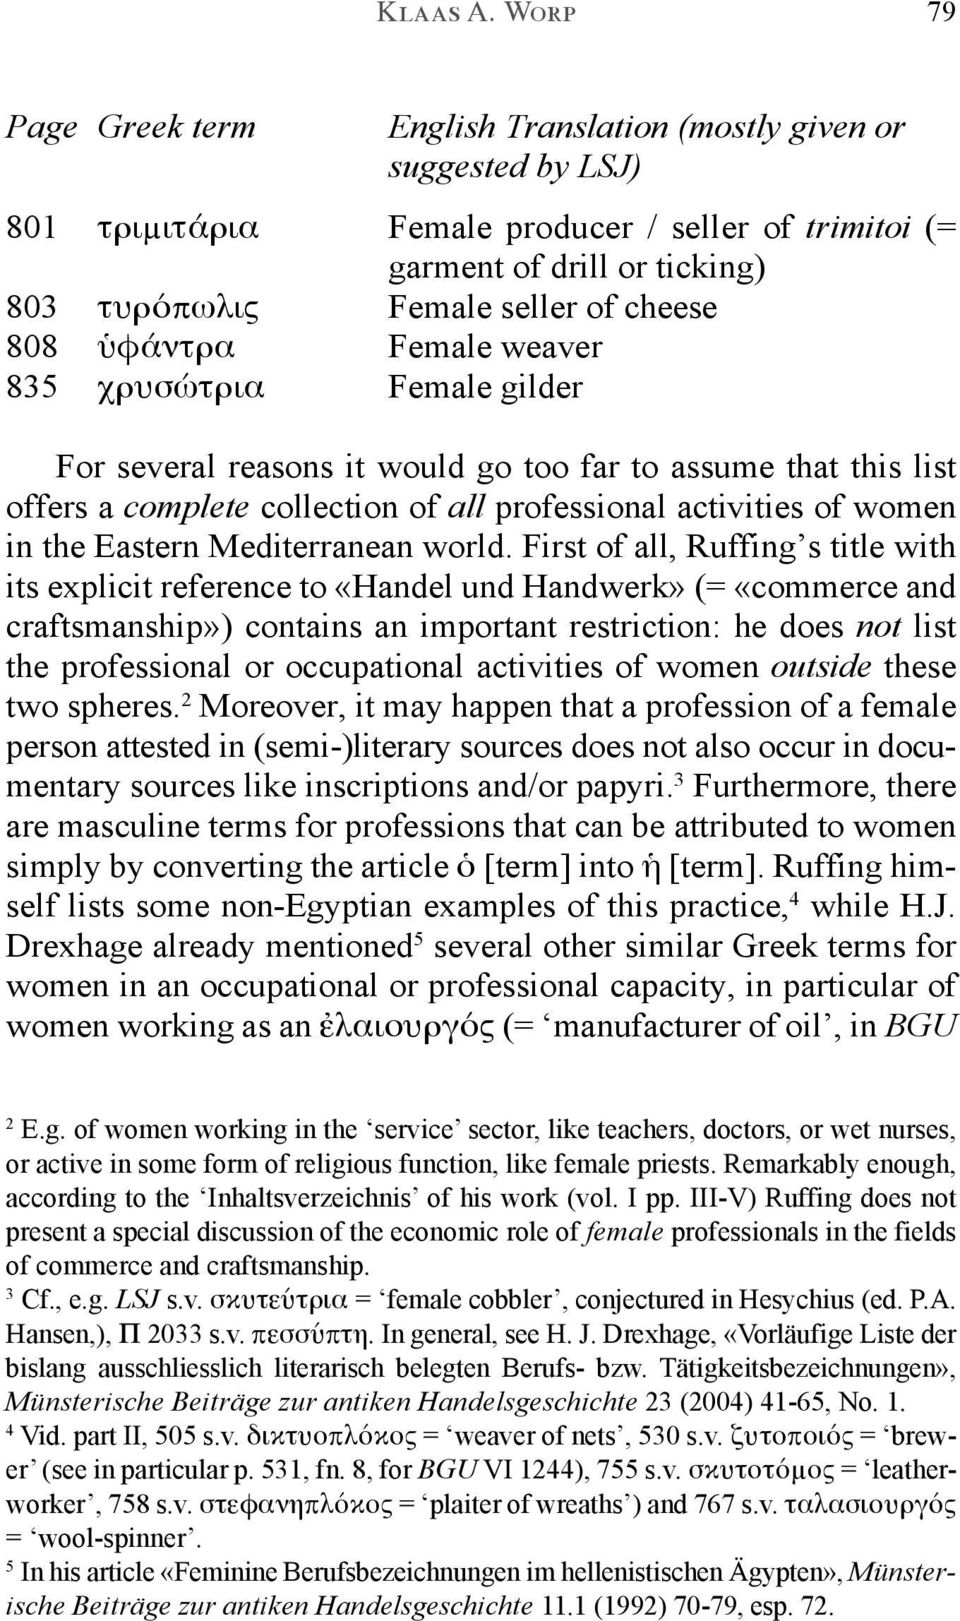 cheese 808 ὑφάντρα Female weaver 835 χρυσώτρια Female gilder For several reasons it would go too far to assume that this list offers a complete collection of all professional activities of women in